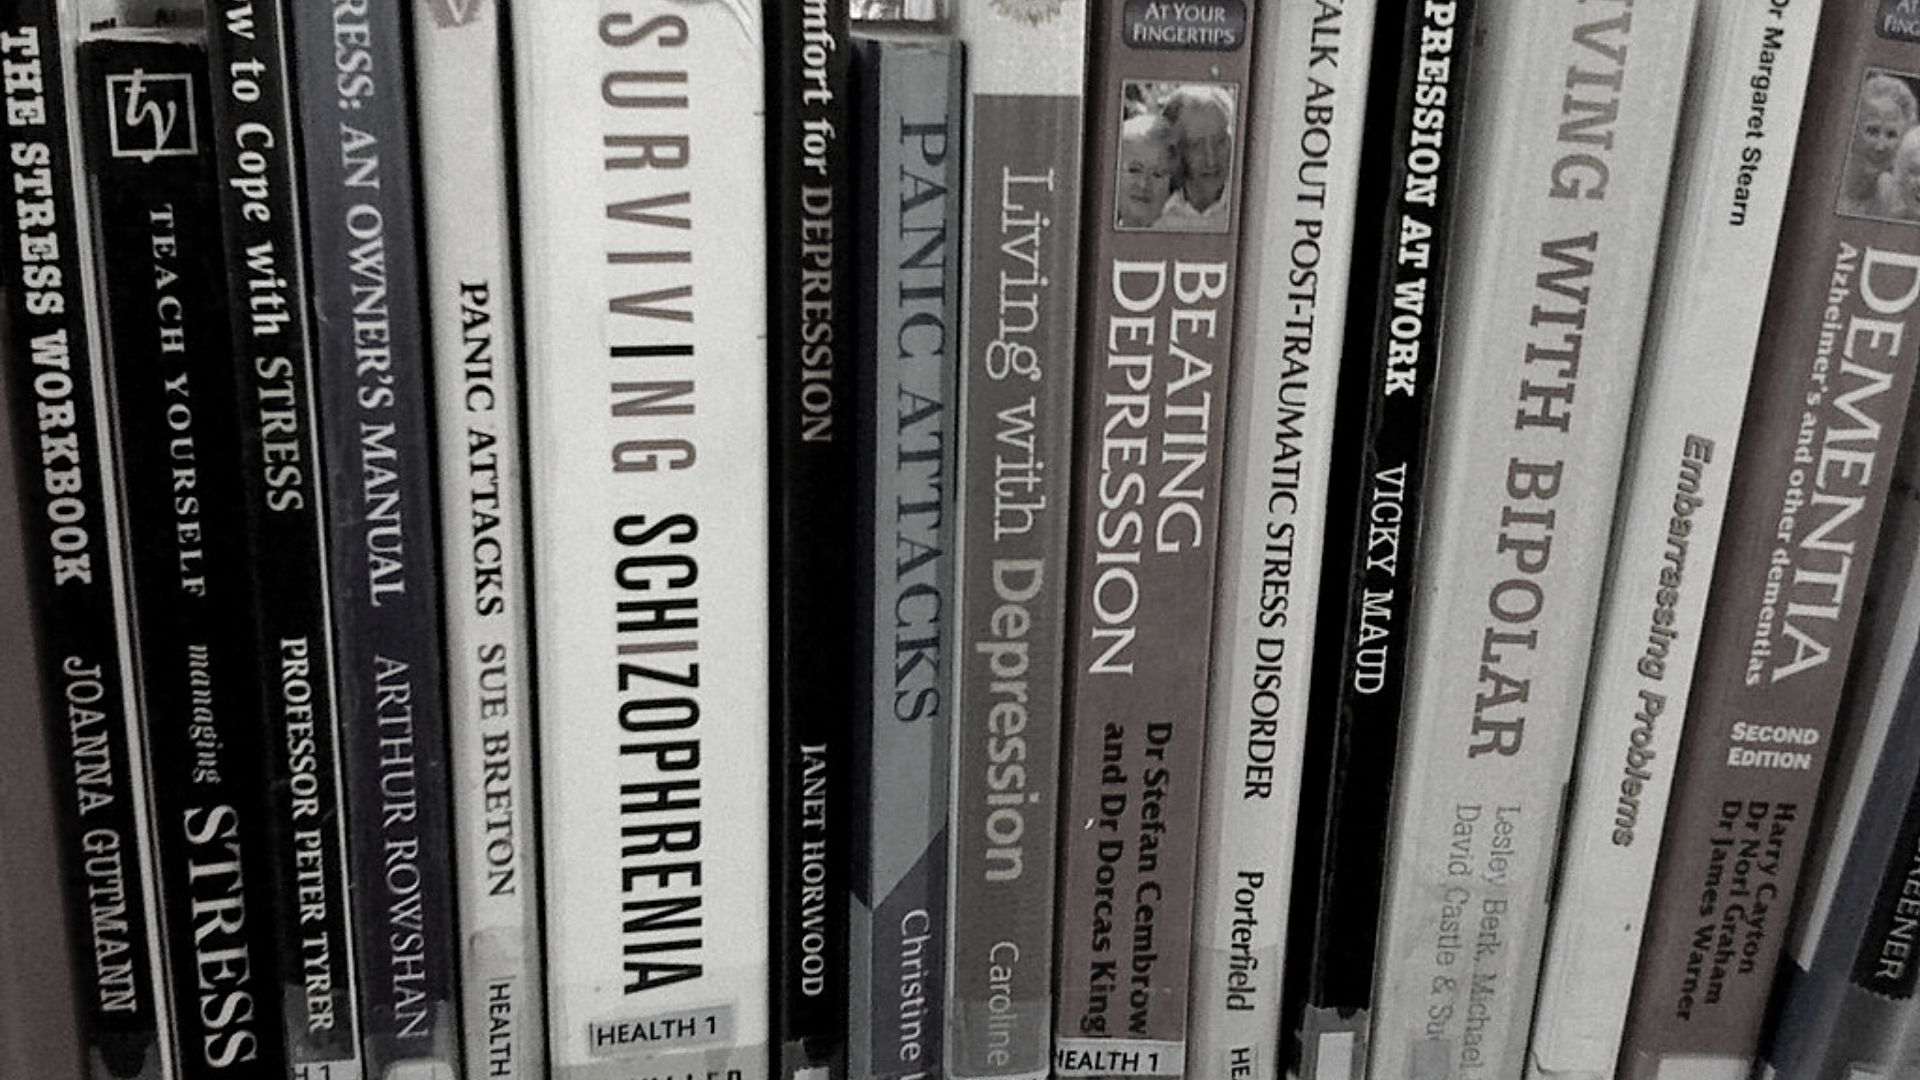 Photo showing different books about mental health topics such as schizophrenia, battling depression, dementia stress and panic attacks.